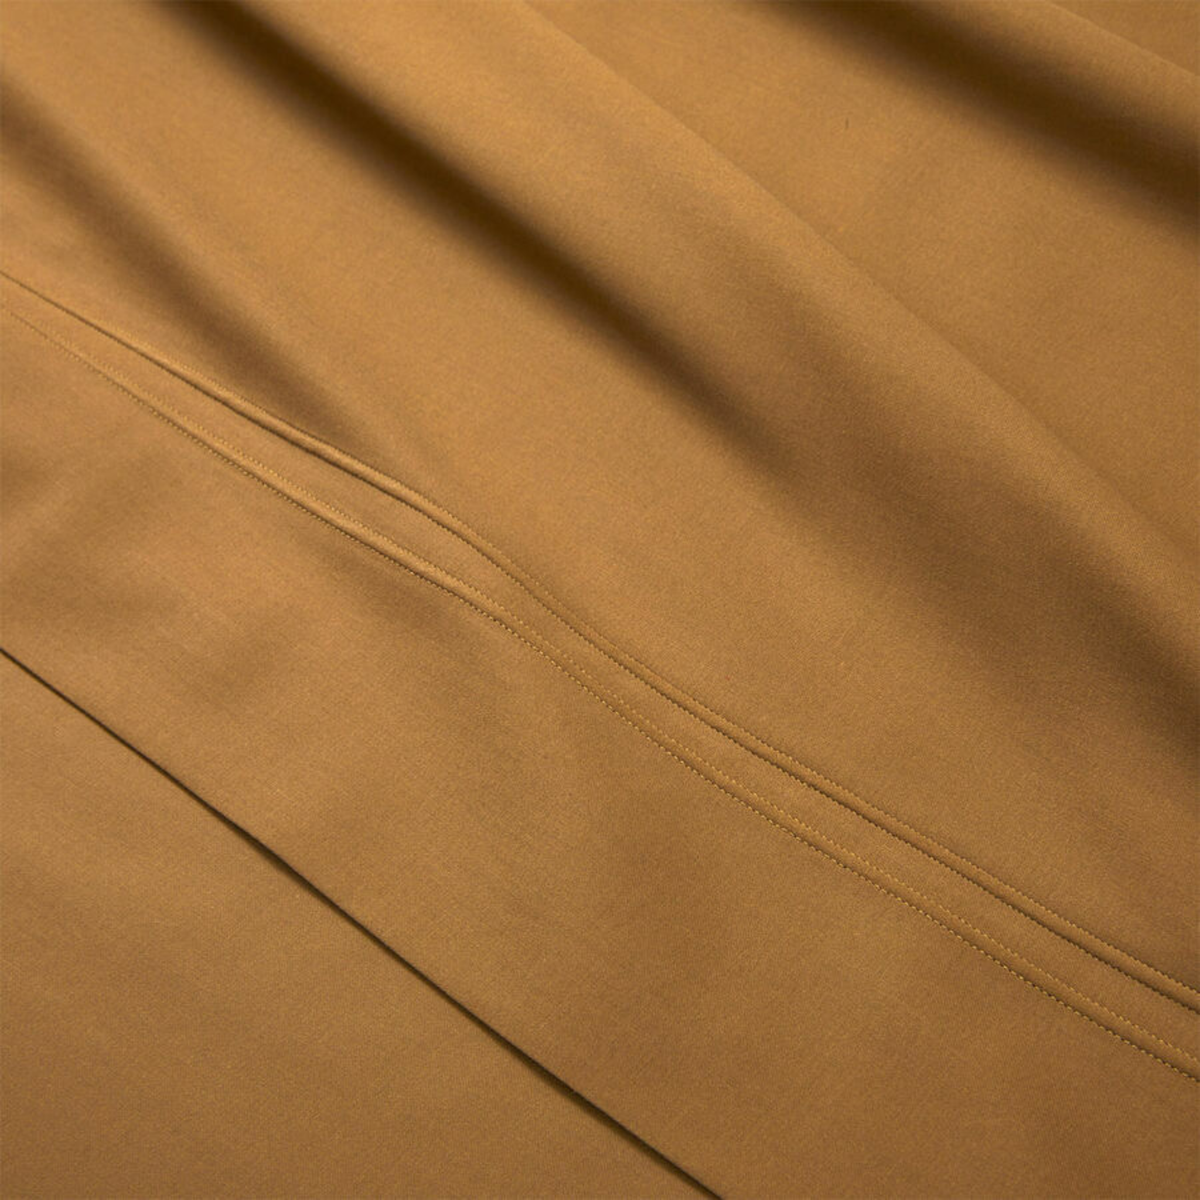 Fabric Detail of Yves Delorme Triomphe Bedding in Bronze Color